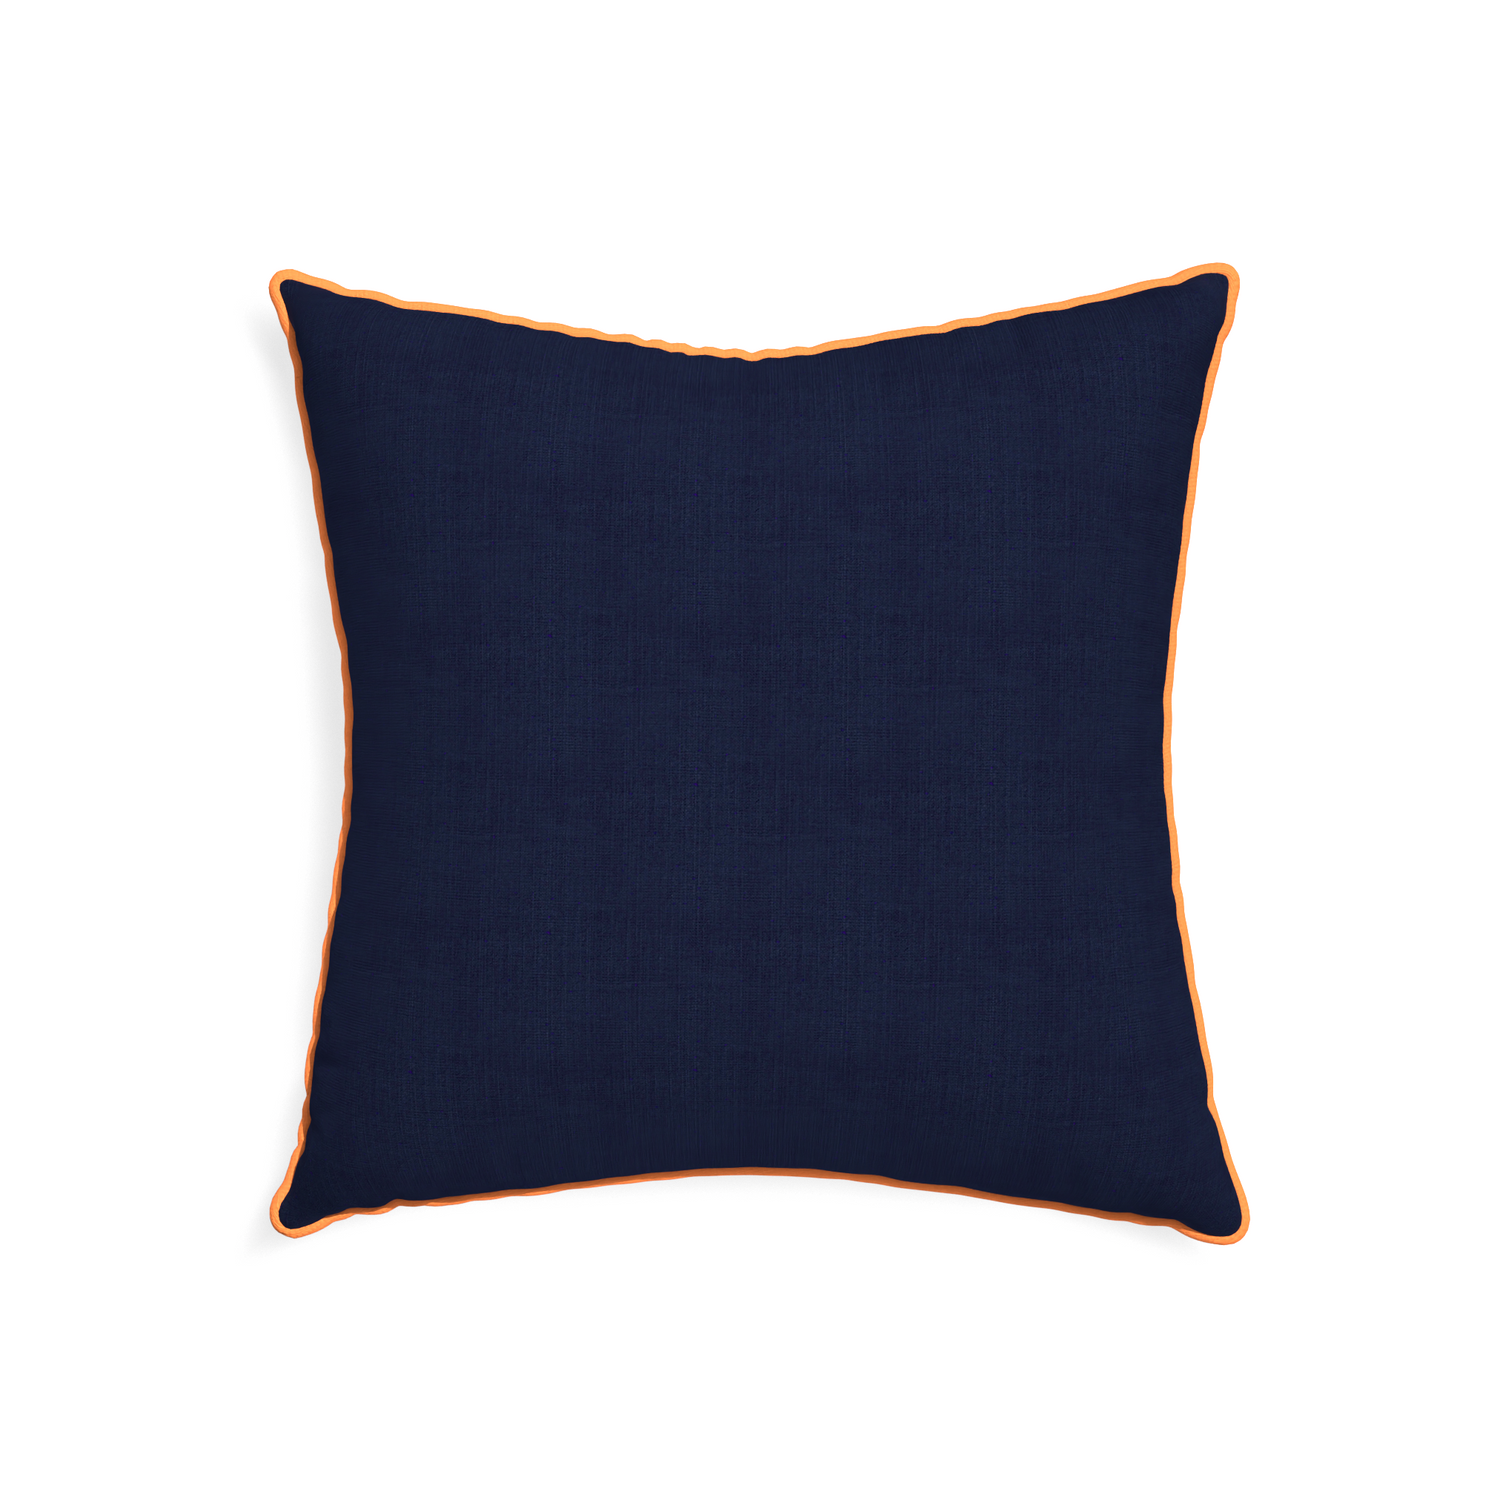 22-square midnight custom navy bluepillow with clementine piping on white background